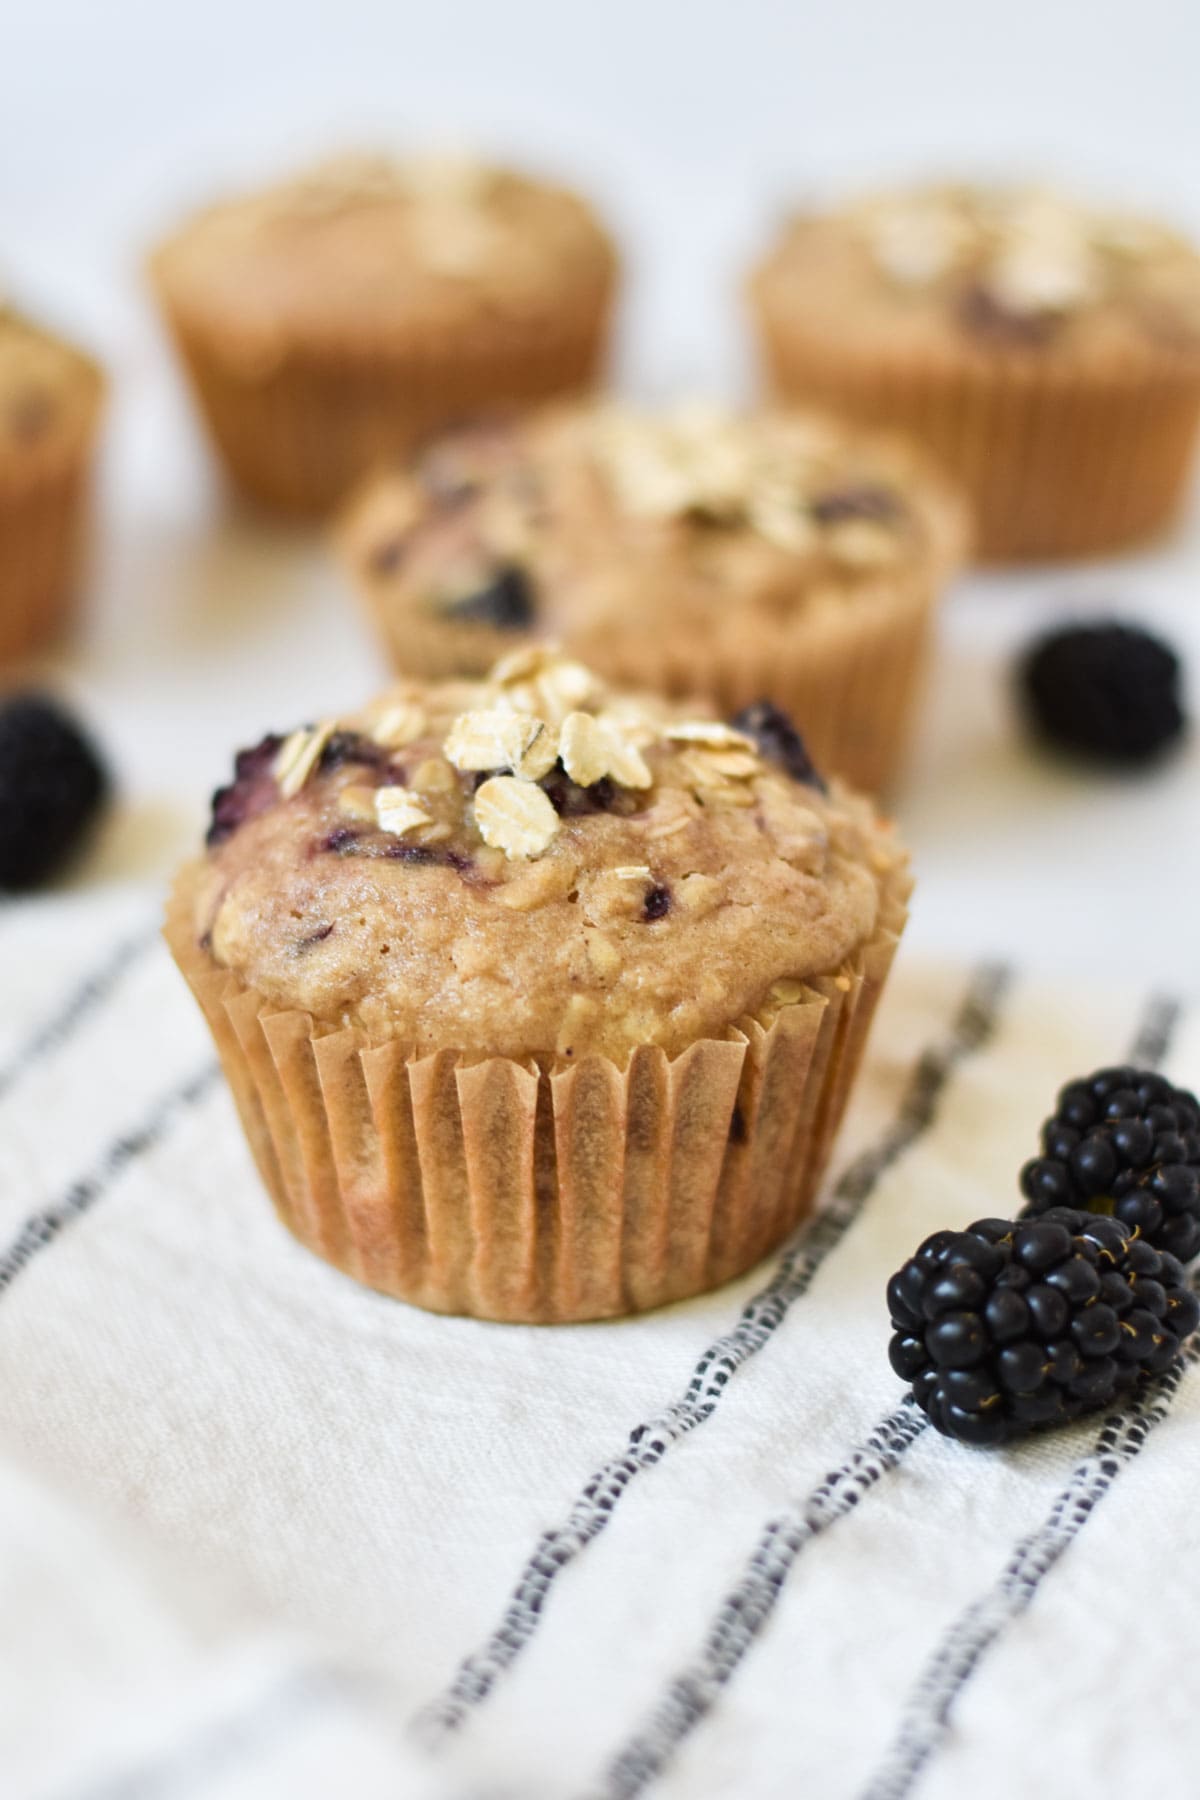 A muffin with blackberries around it.